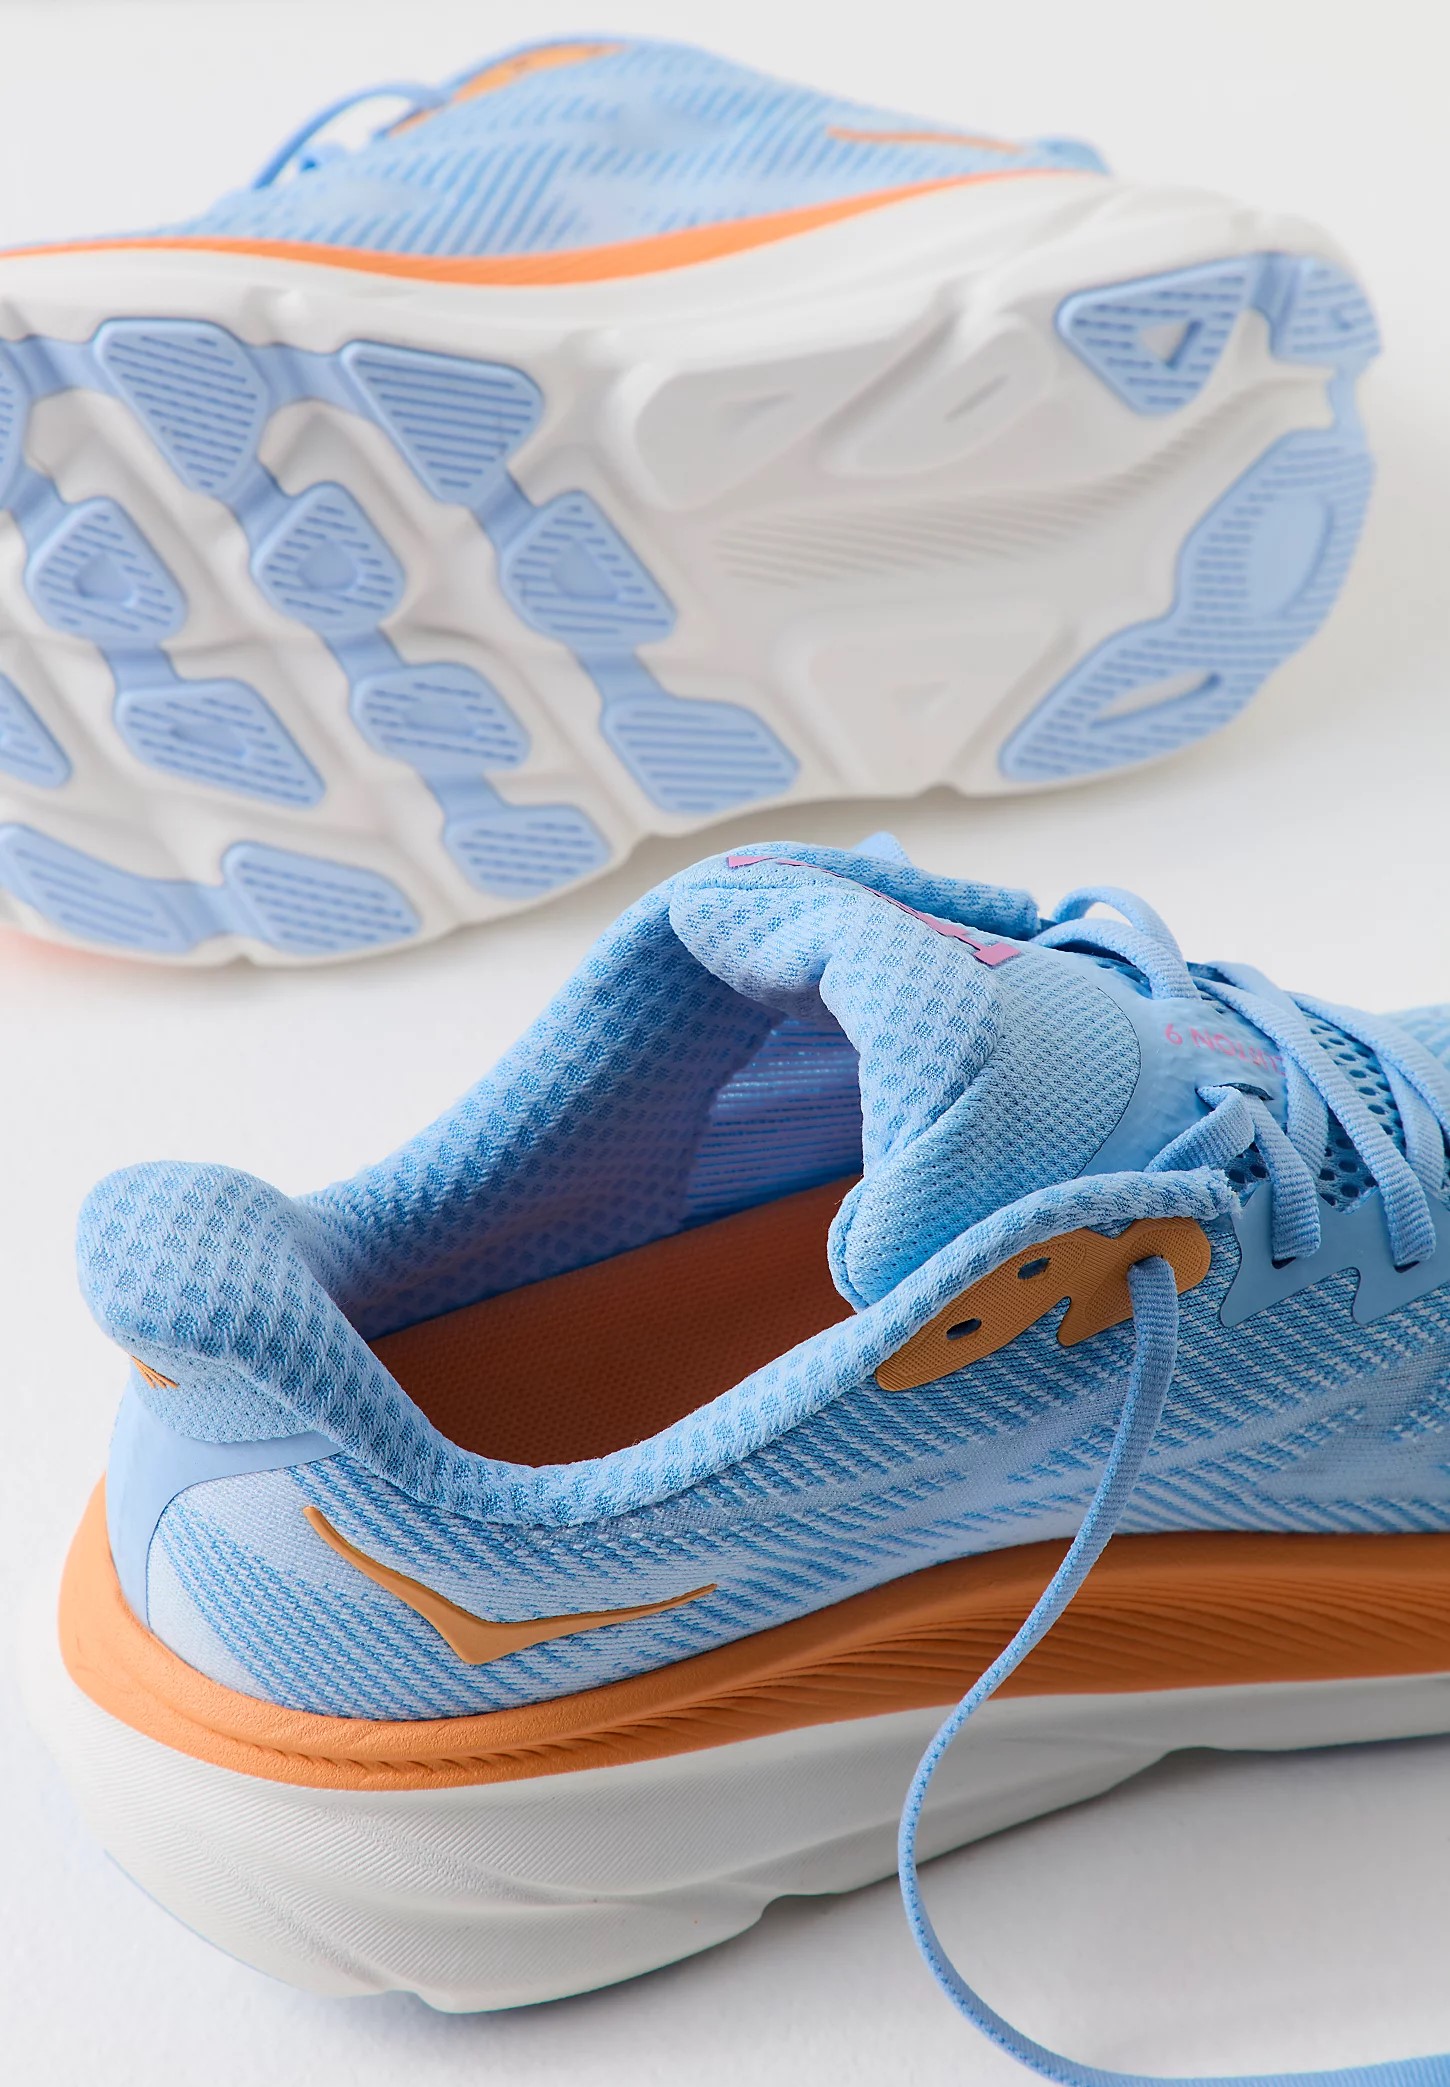 GIÀY HOKA NỮ CLIFTON 9 AIRY BLUE ICE WATER WOMEN ROAD RUNNING SHOES 1127896-ABIW 12